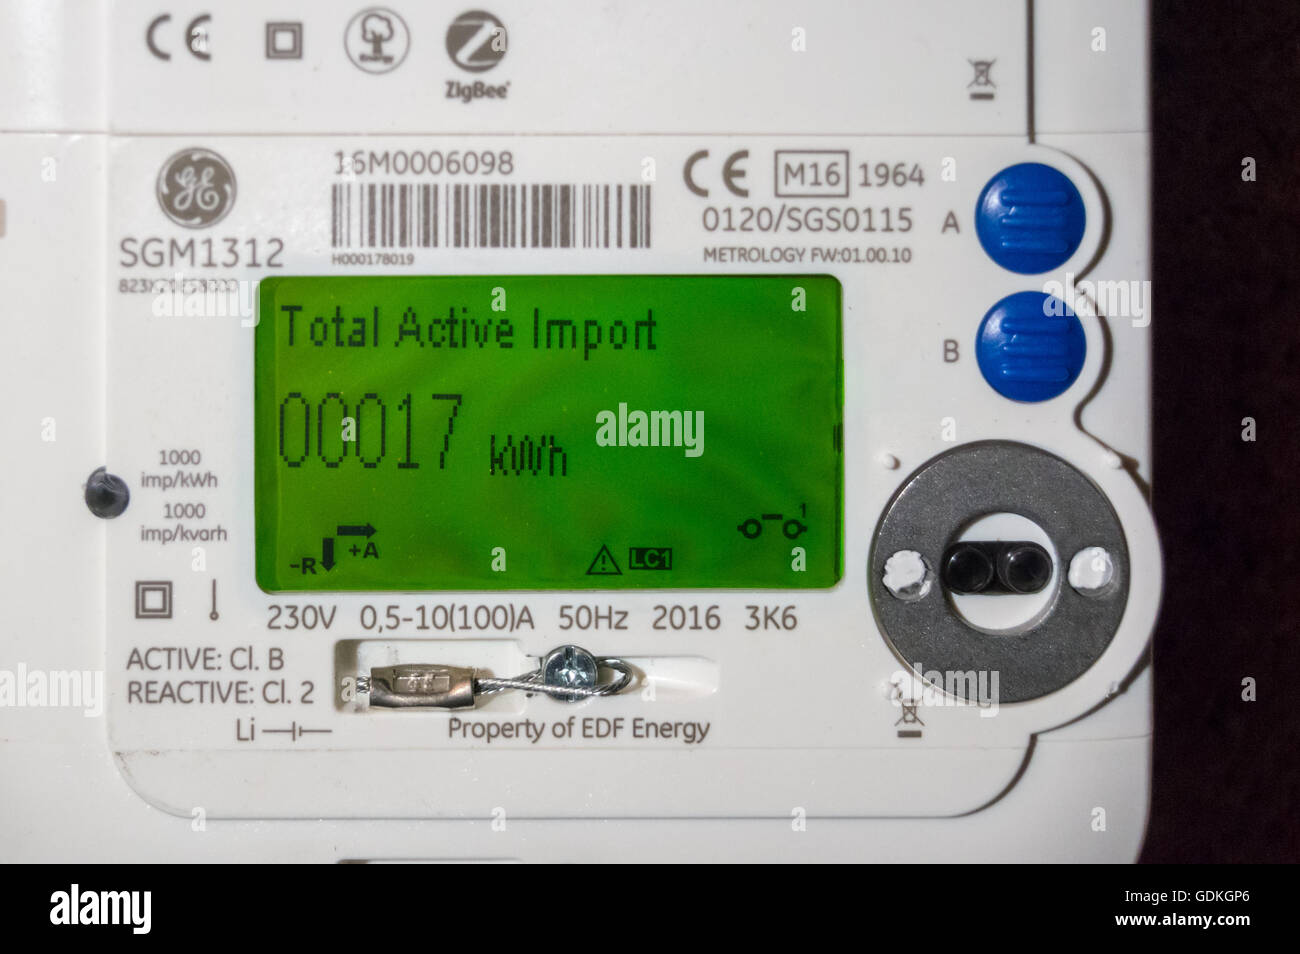 A newly installed EDF GE SGM1312 LCD display smart electricity meter showing reading of 17kWh in a wine cellar in London England Stock Photo